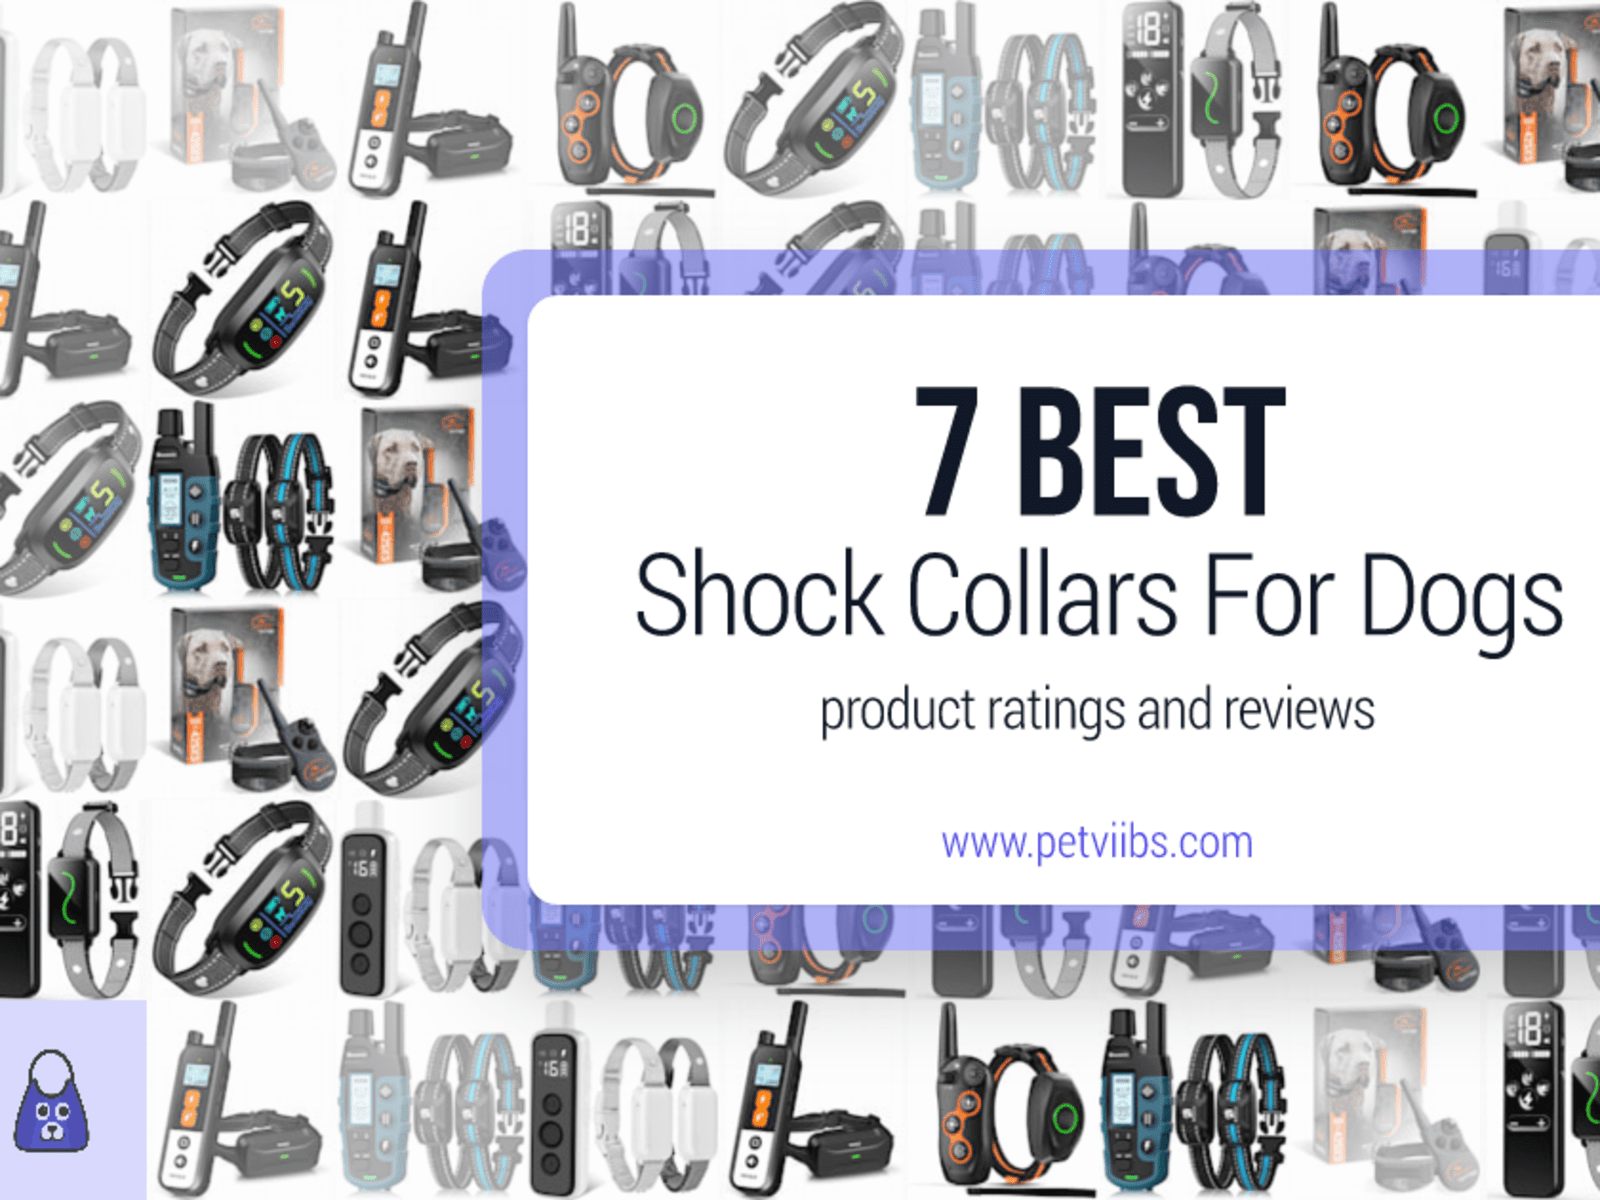 Best Shock Collars For Dogs Ratings and Reviews